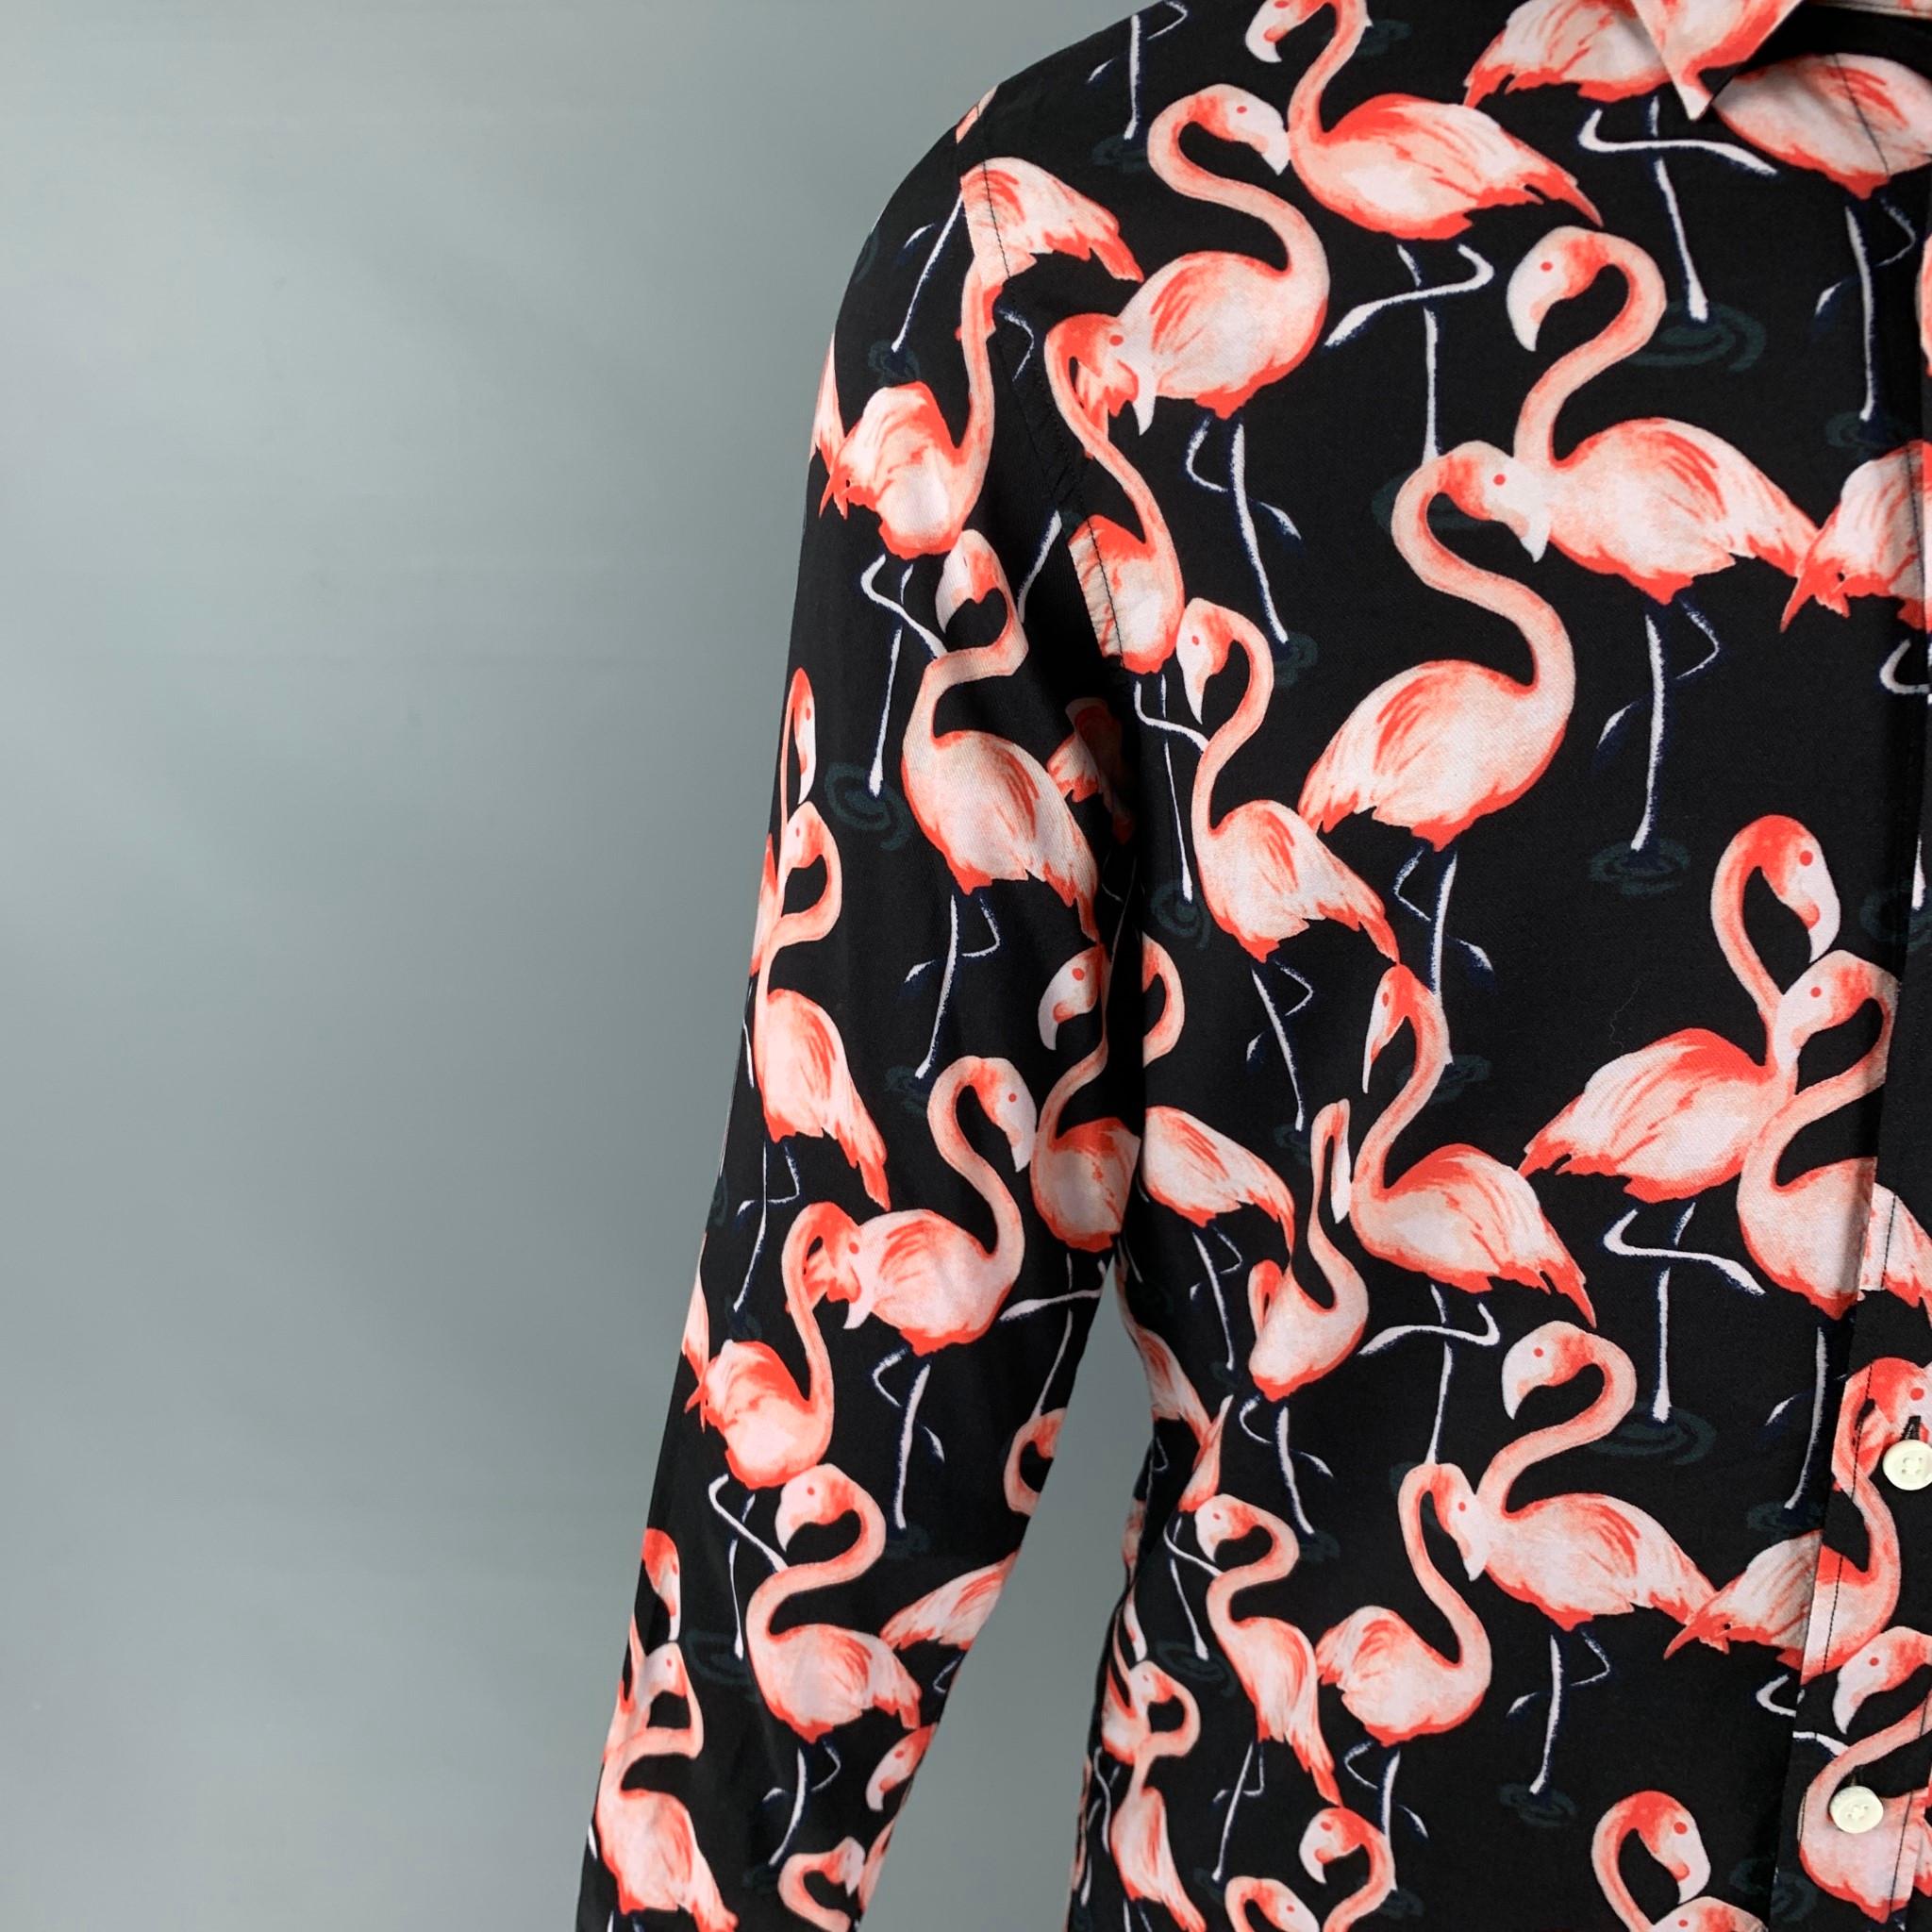 MARC JACOBS long sleeve shirt comes in a black & pink flamingo print viscose featuring a spread collar and a button up closure. 

Excellent Pre-Owned Condition.
Marked: 48

Measurements:

Shoulder: 17.5 in.
Chest: 38 in.
Sleeve: 25.5 in.
Length: 31